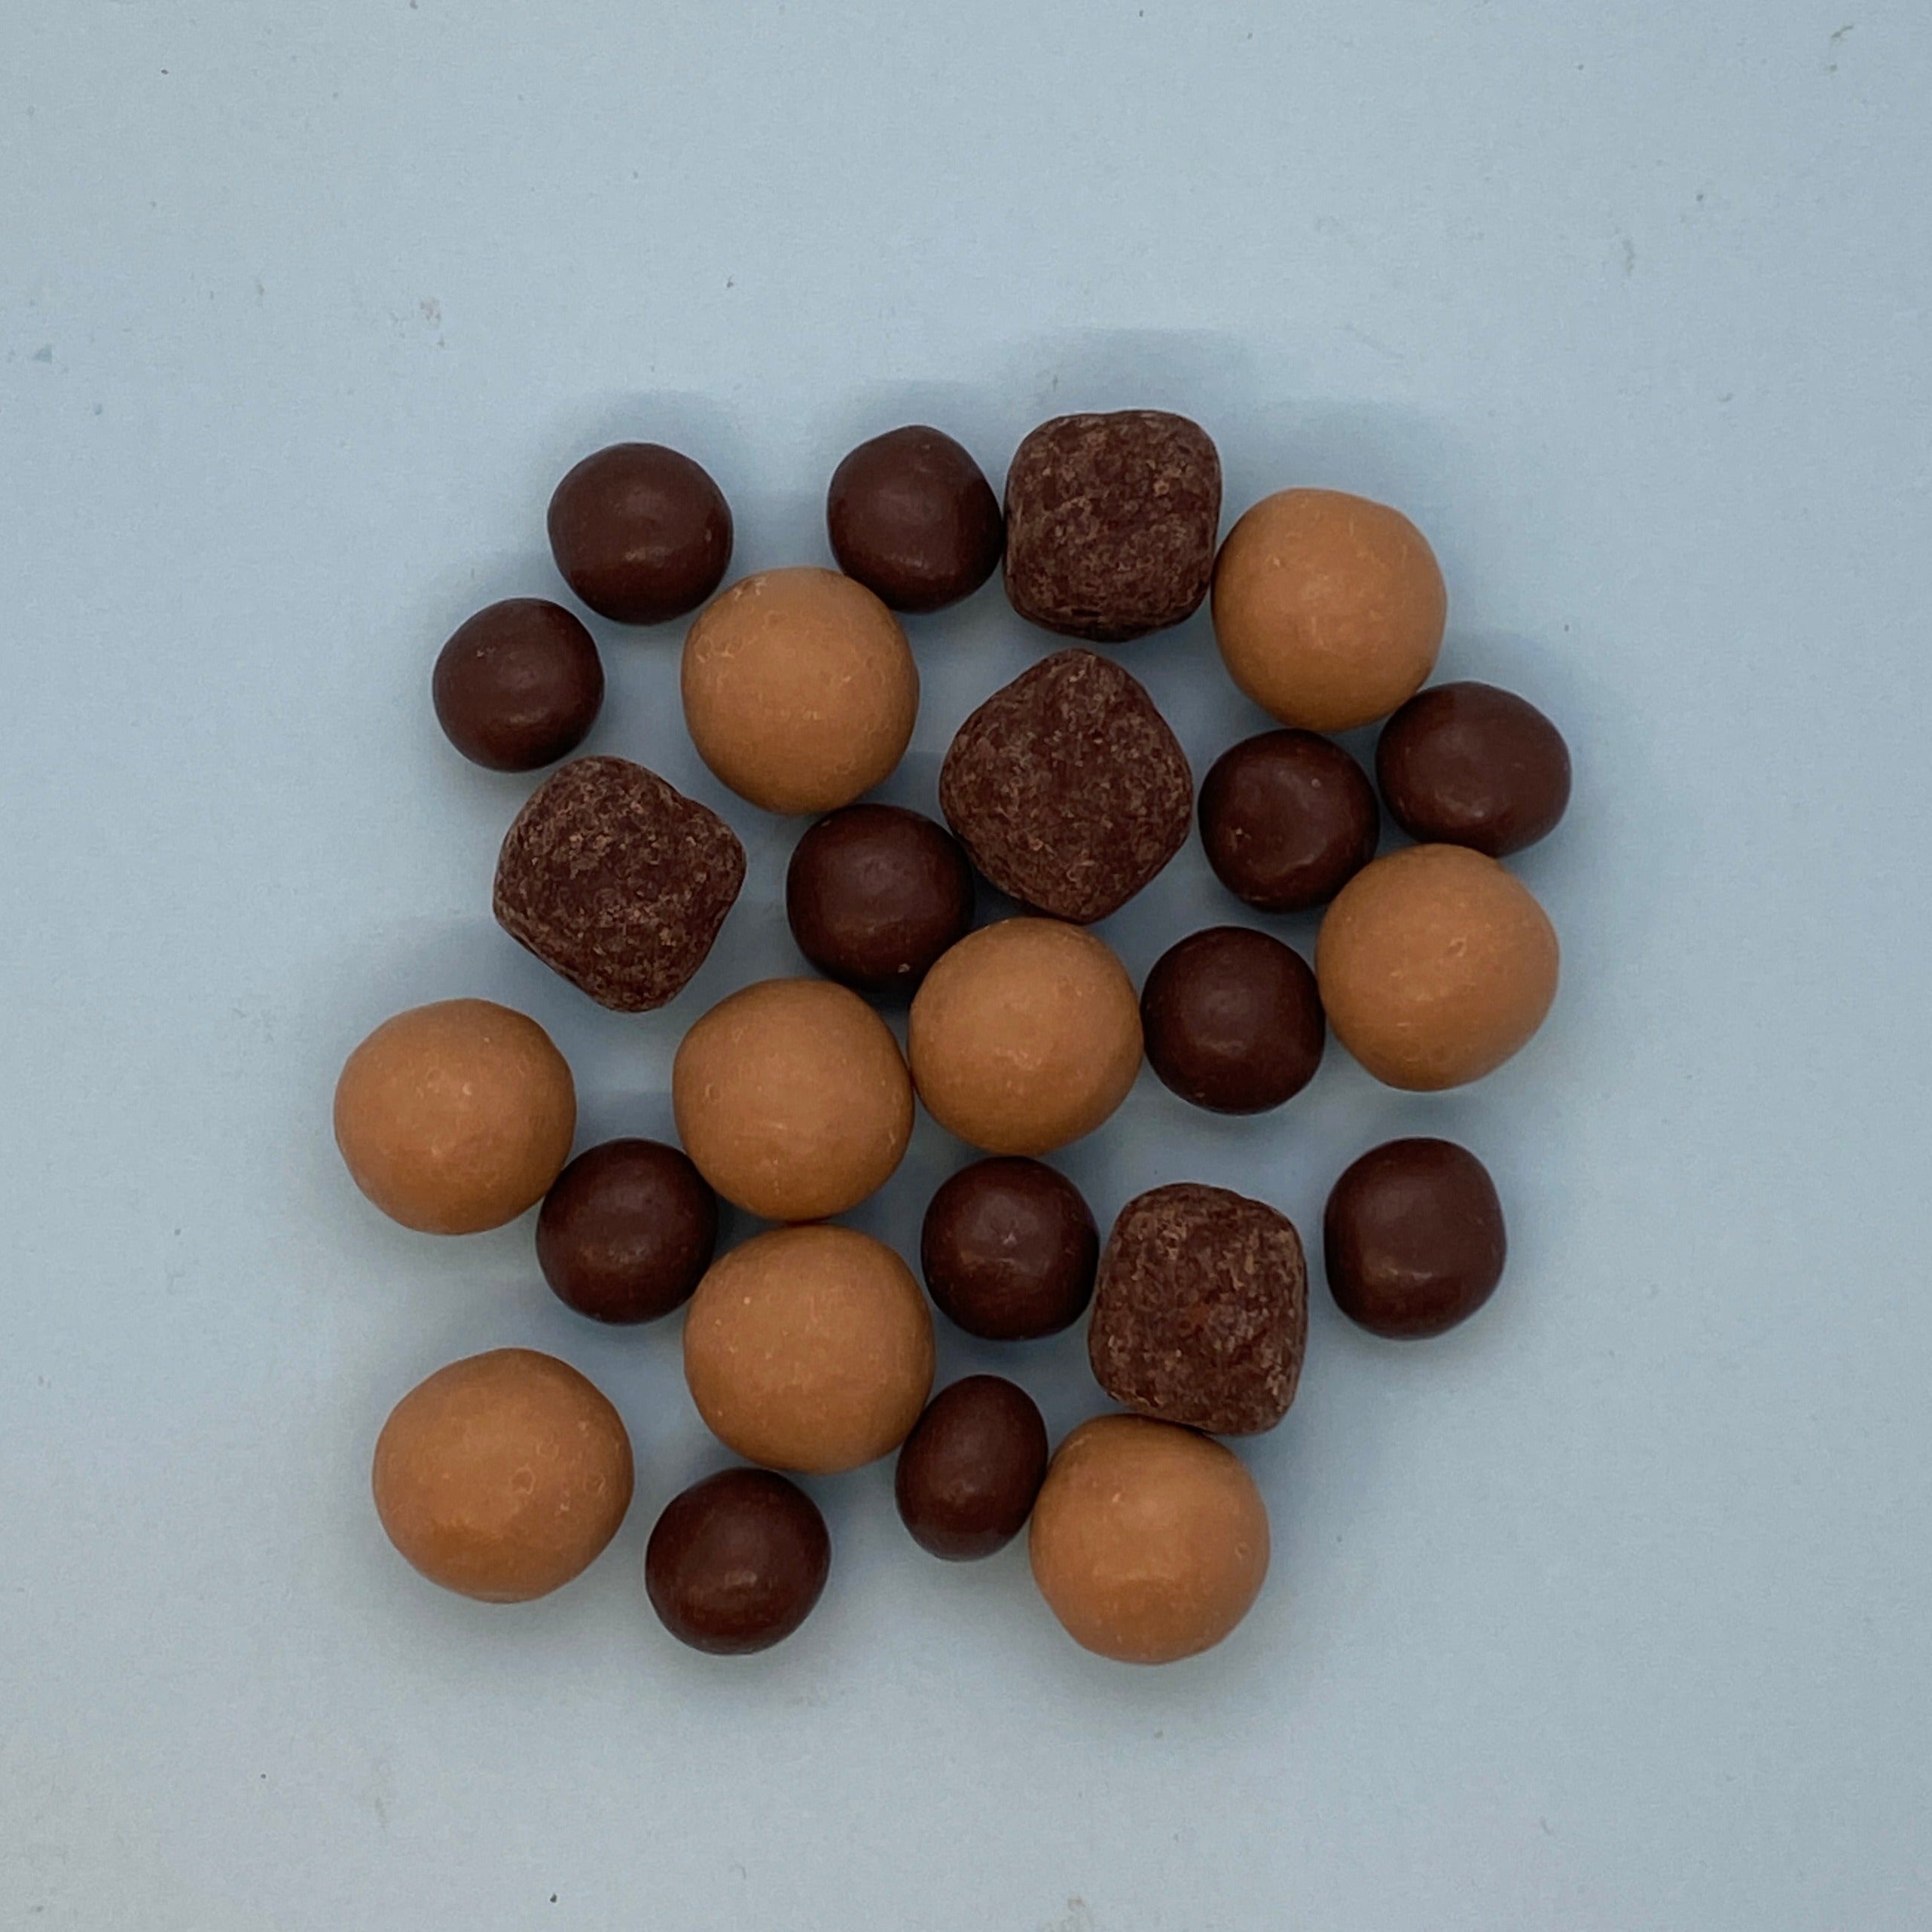 the contents of the chillin' mix on a blue background; nine light brown malt balls, twelve small dark brown pretzel balls and four pieces of caramel